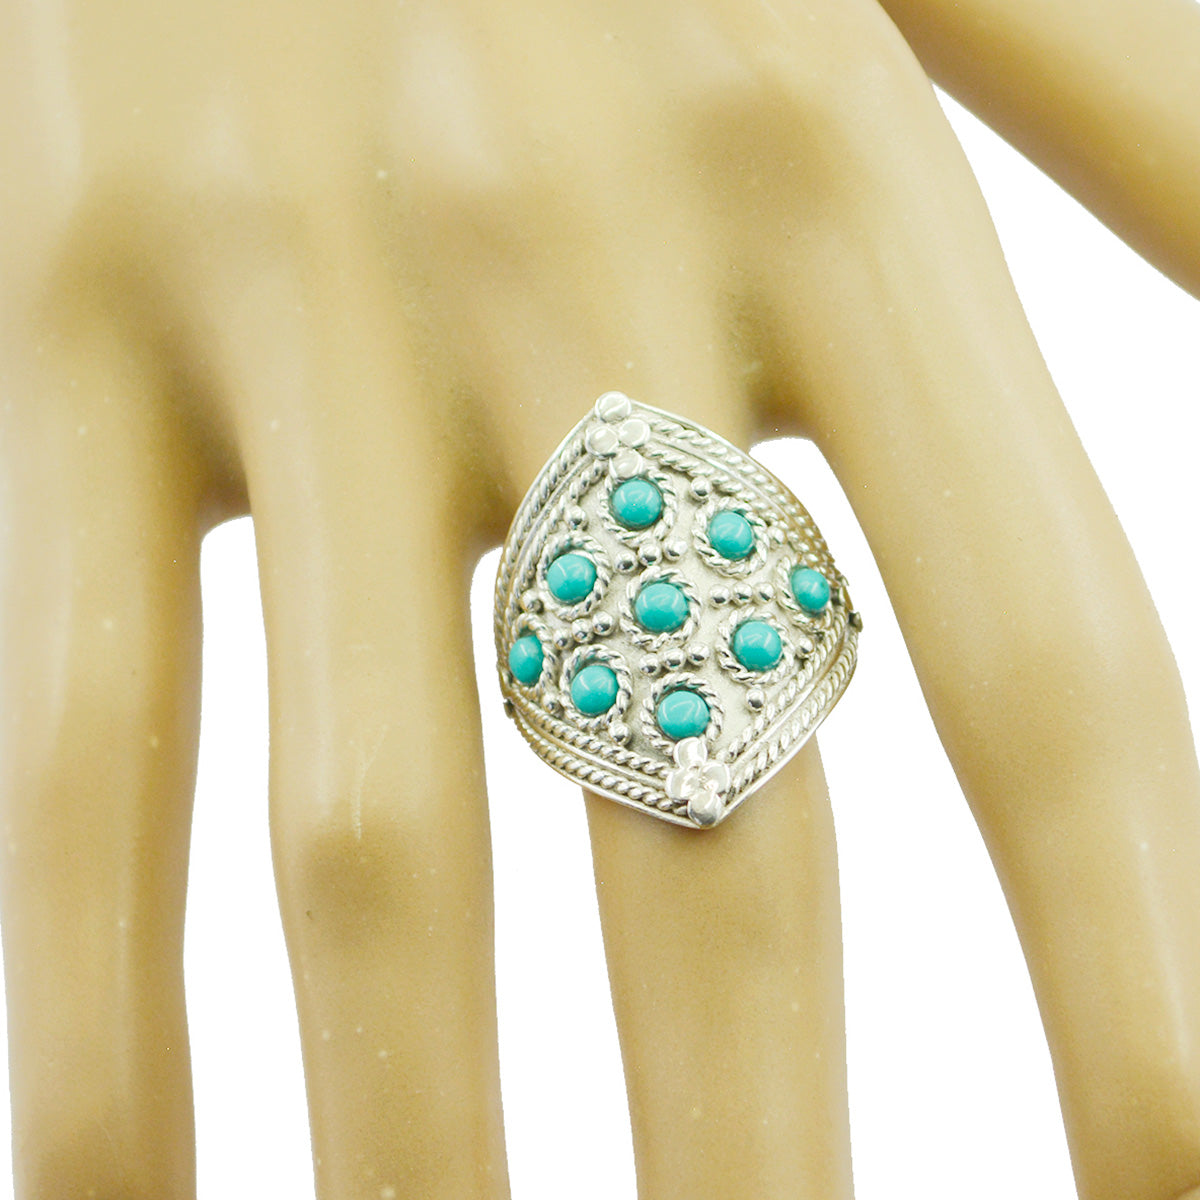 Fascinating Gem Turquoise Silver Ring Premier Jewelry Online Catalog